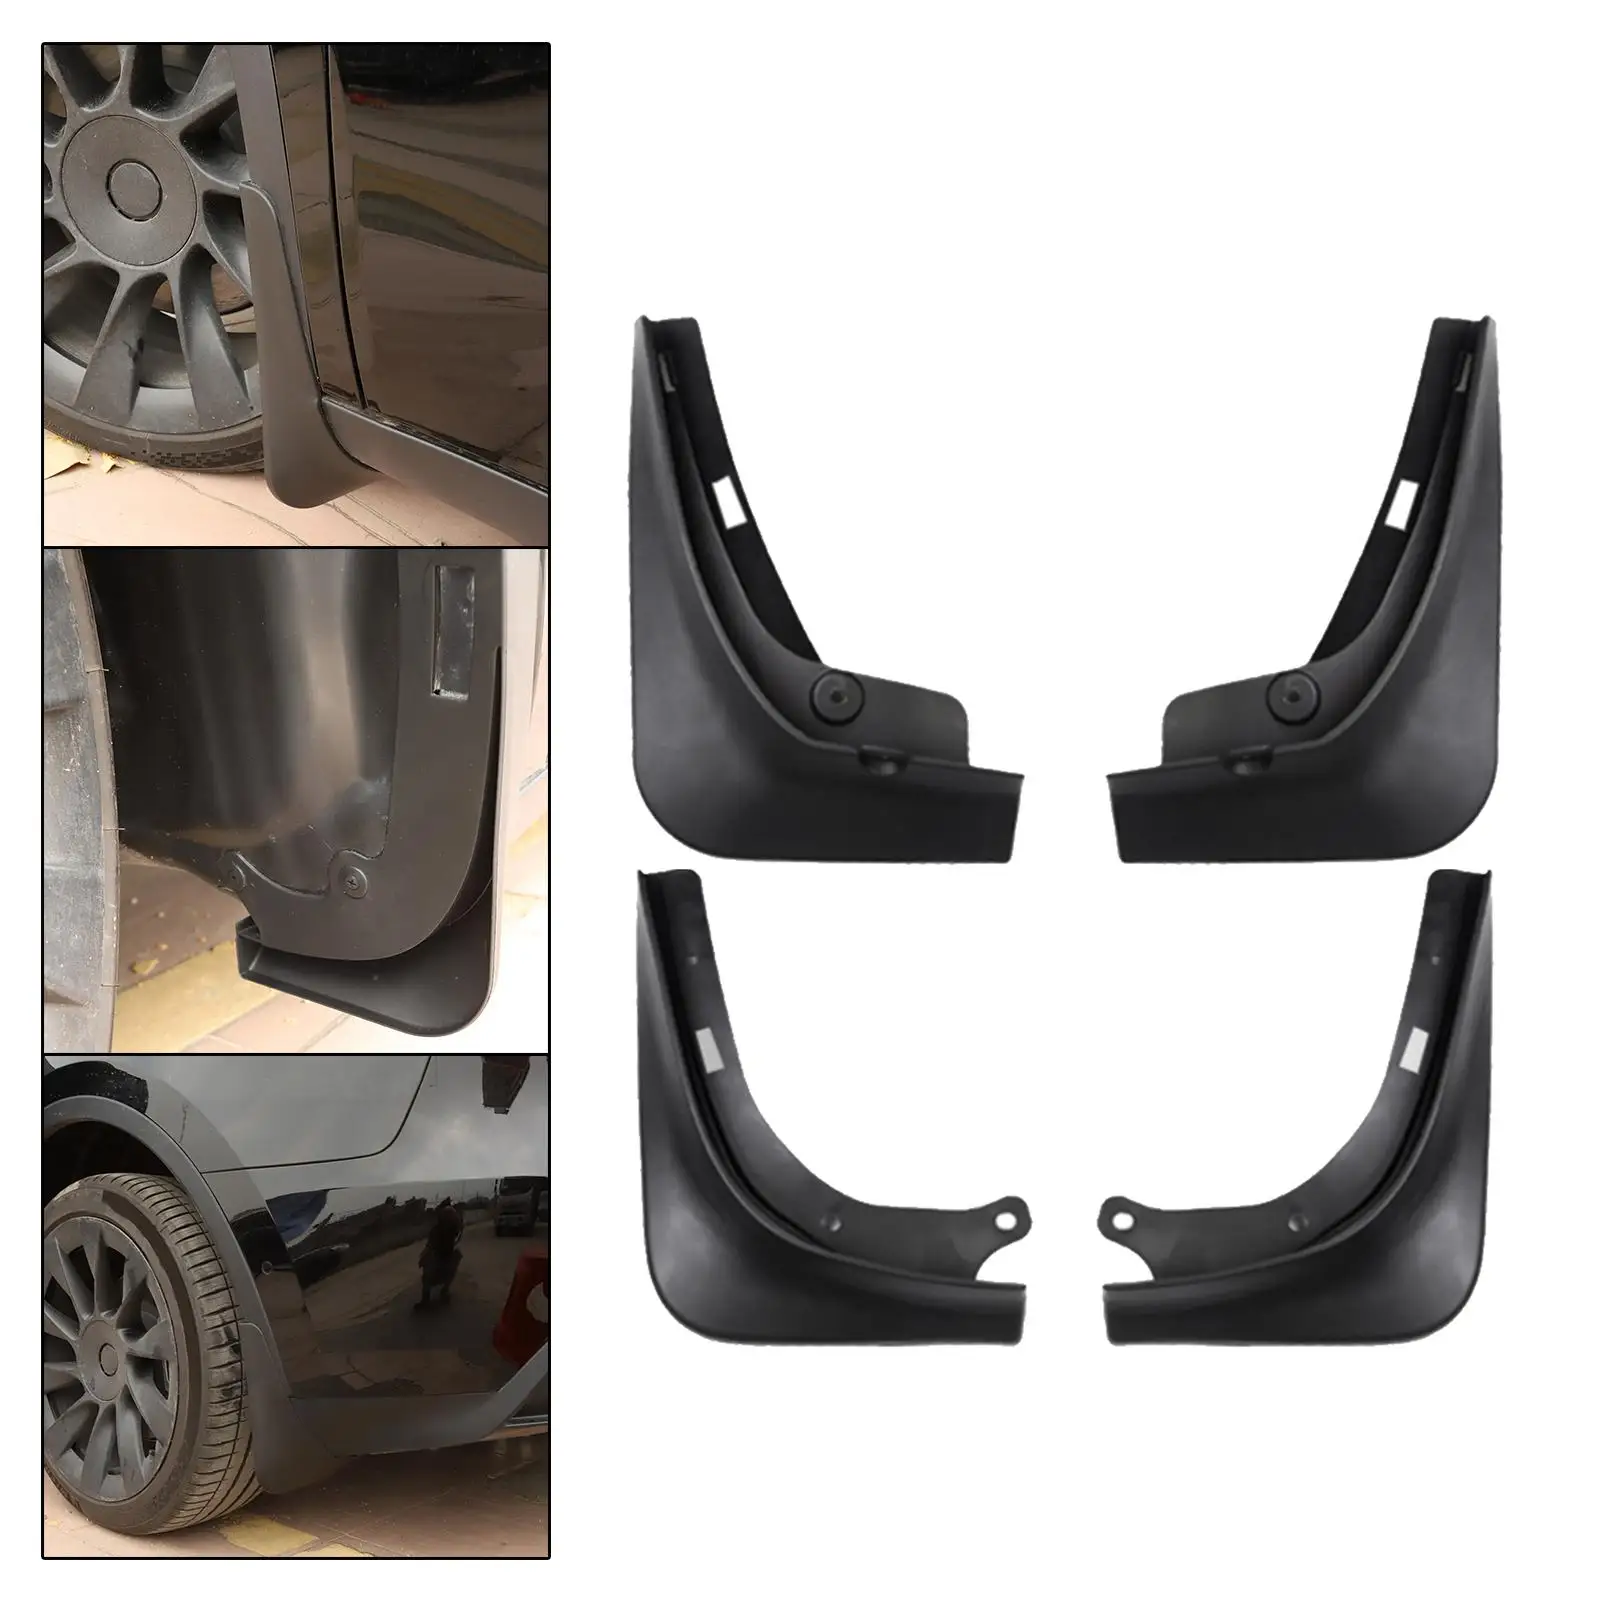 4Pcs Car Wheel  Flaps Guards for  No Drilling Required